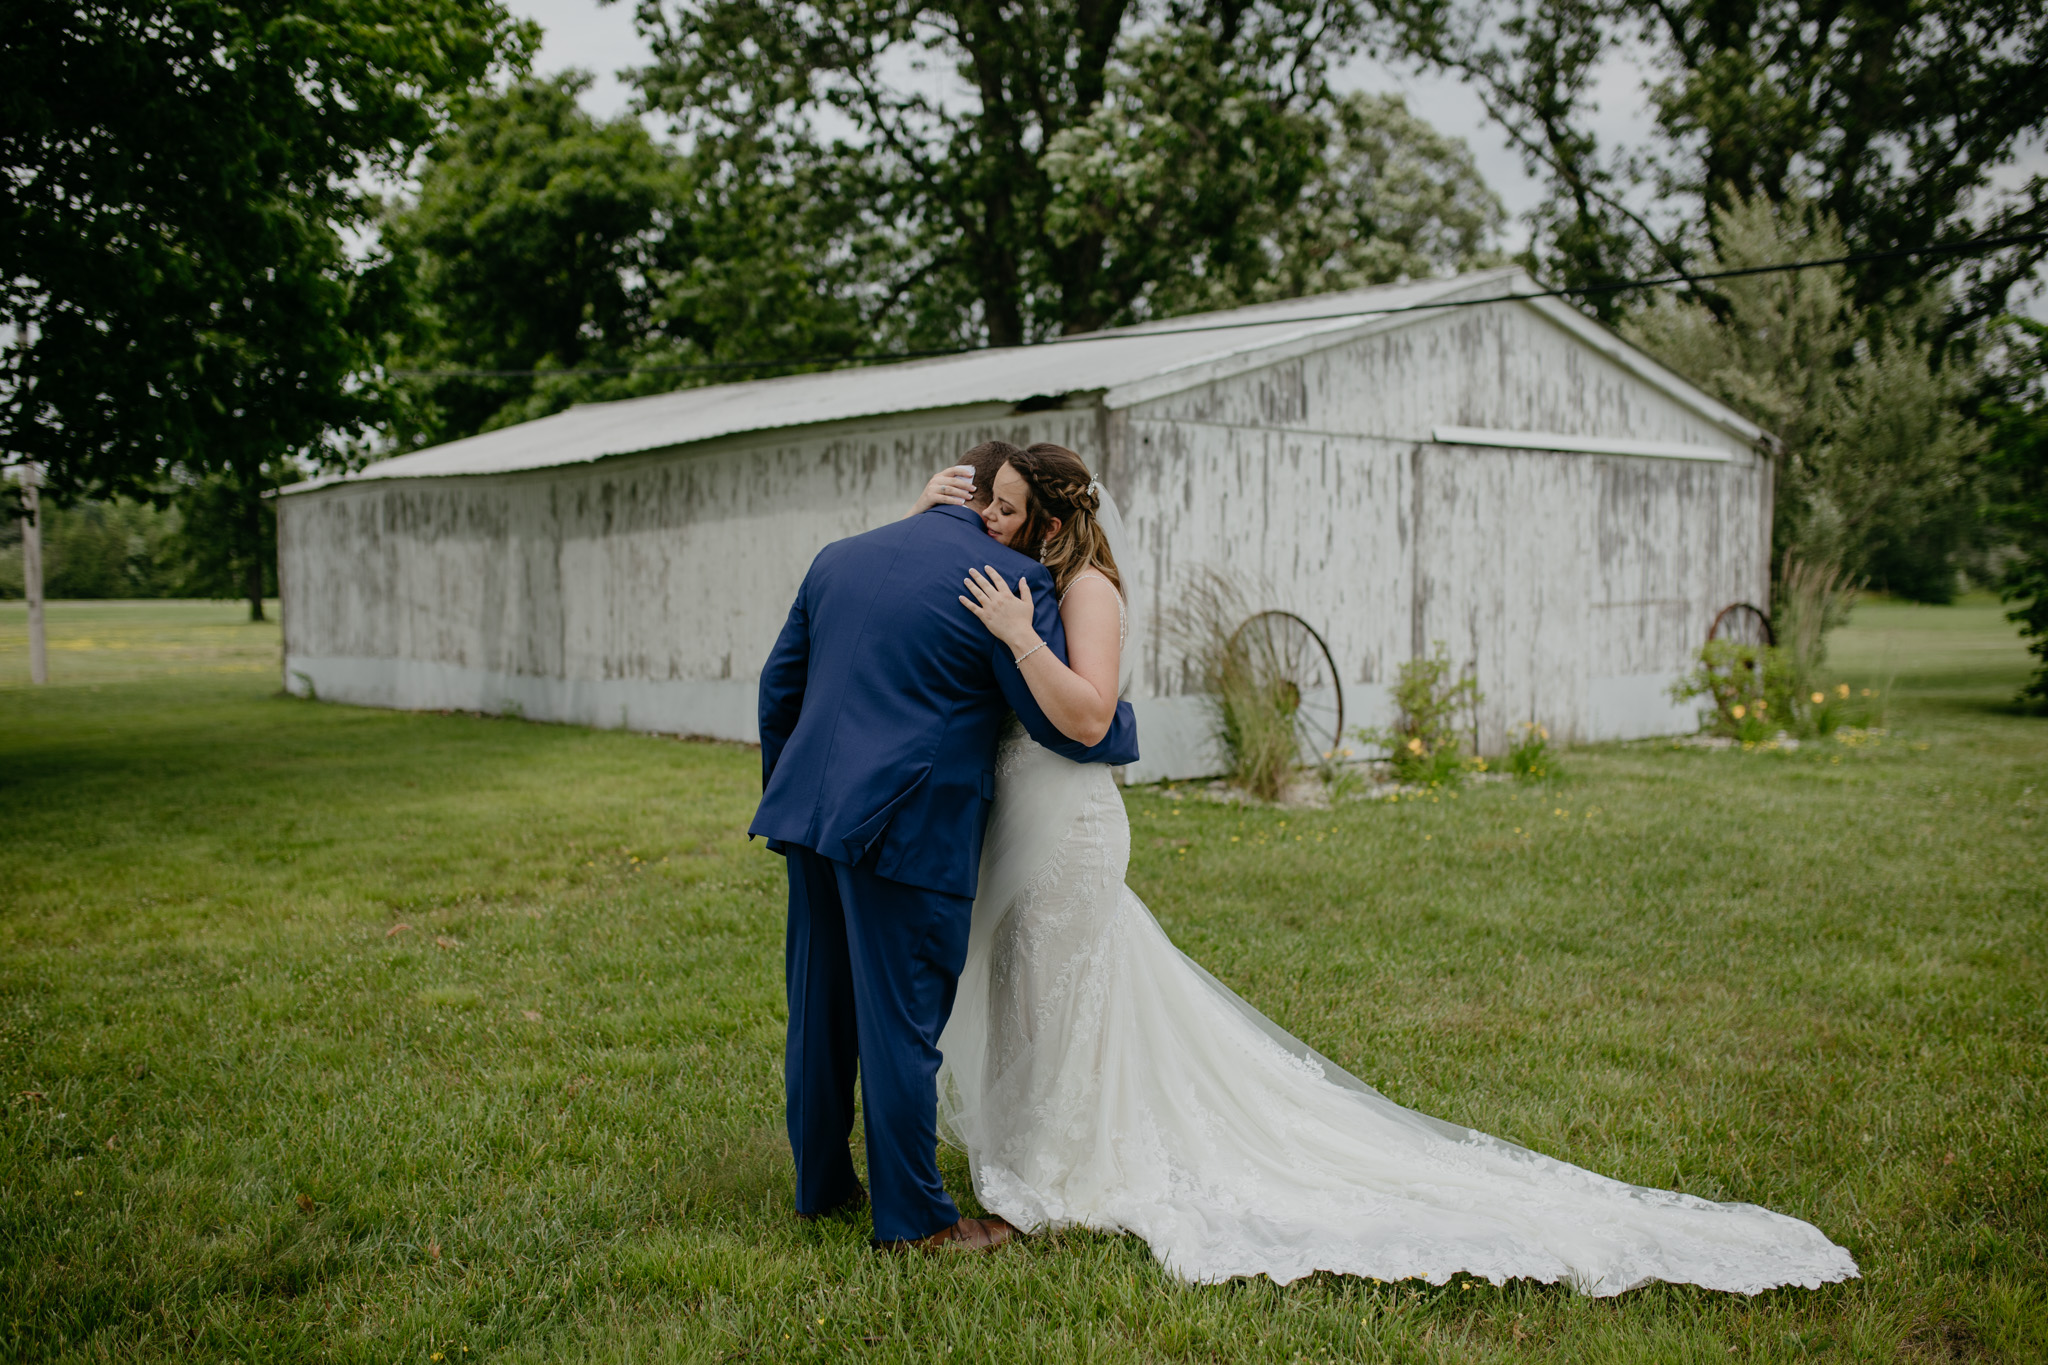 The sweetest first look at this Indiana summer wedding